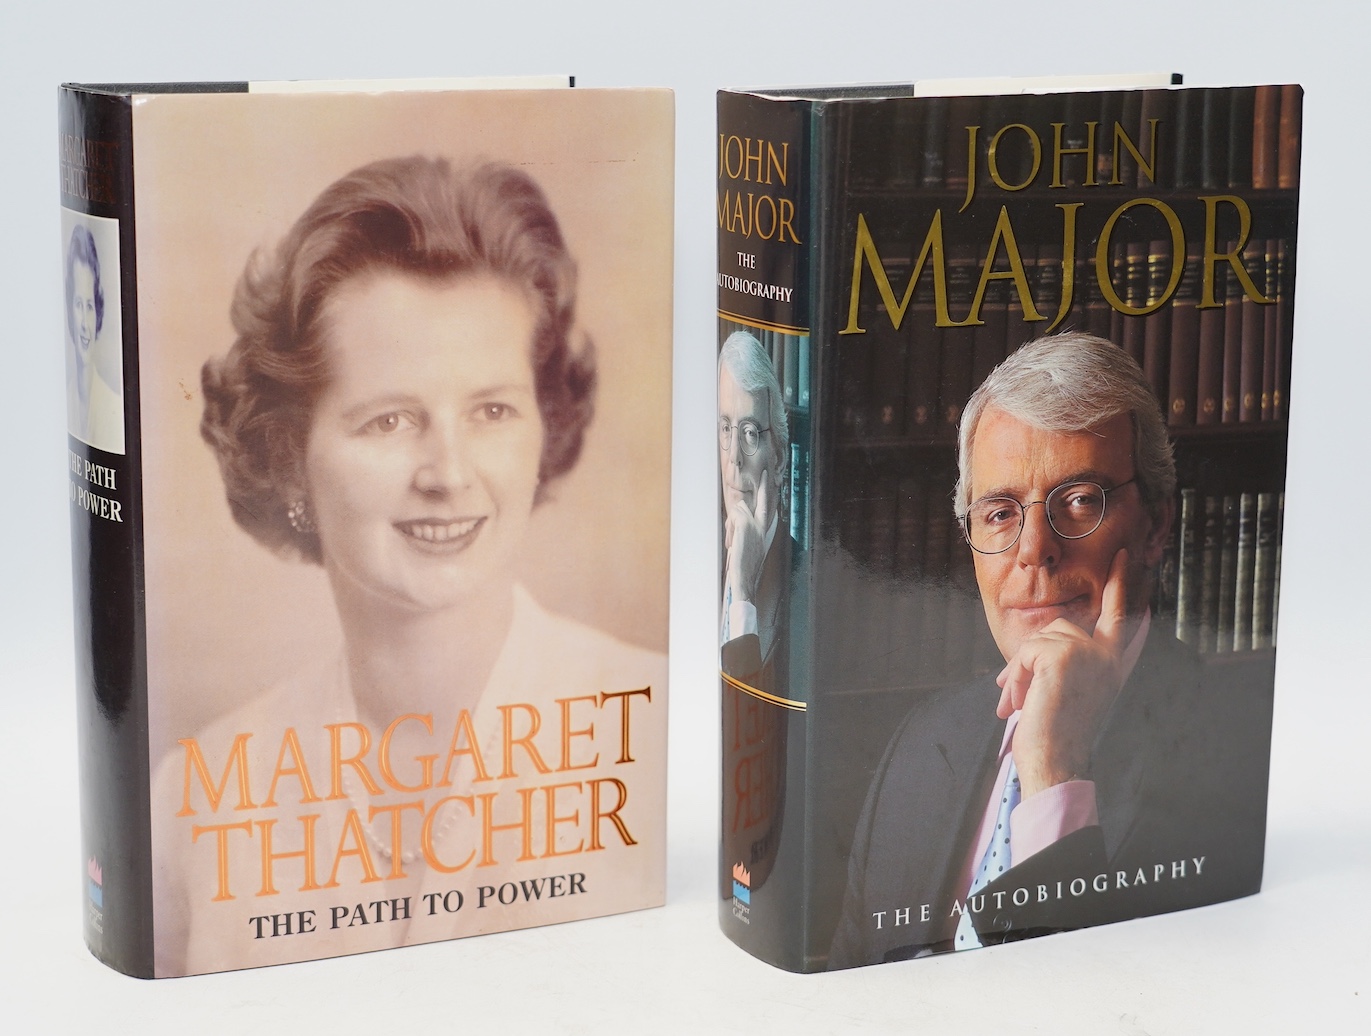 Thatcher , Margaret - The Path to Power. 1st edition (signed by the author on title), num. photo plates; publisher's cloth and d/wrapper,. 1995; Major, John - The Autobiography. 1st edition (short inscription by author o